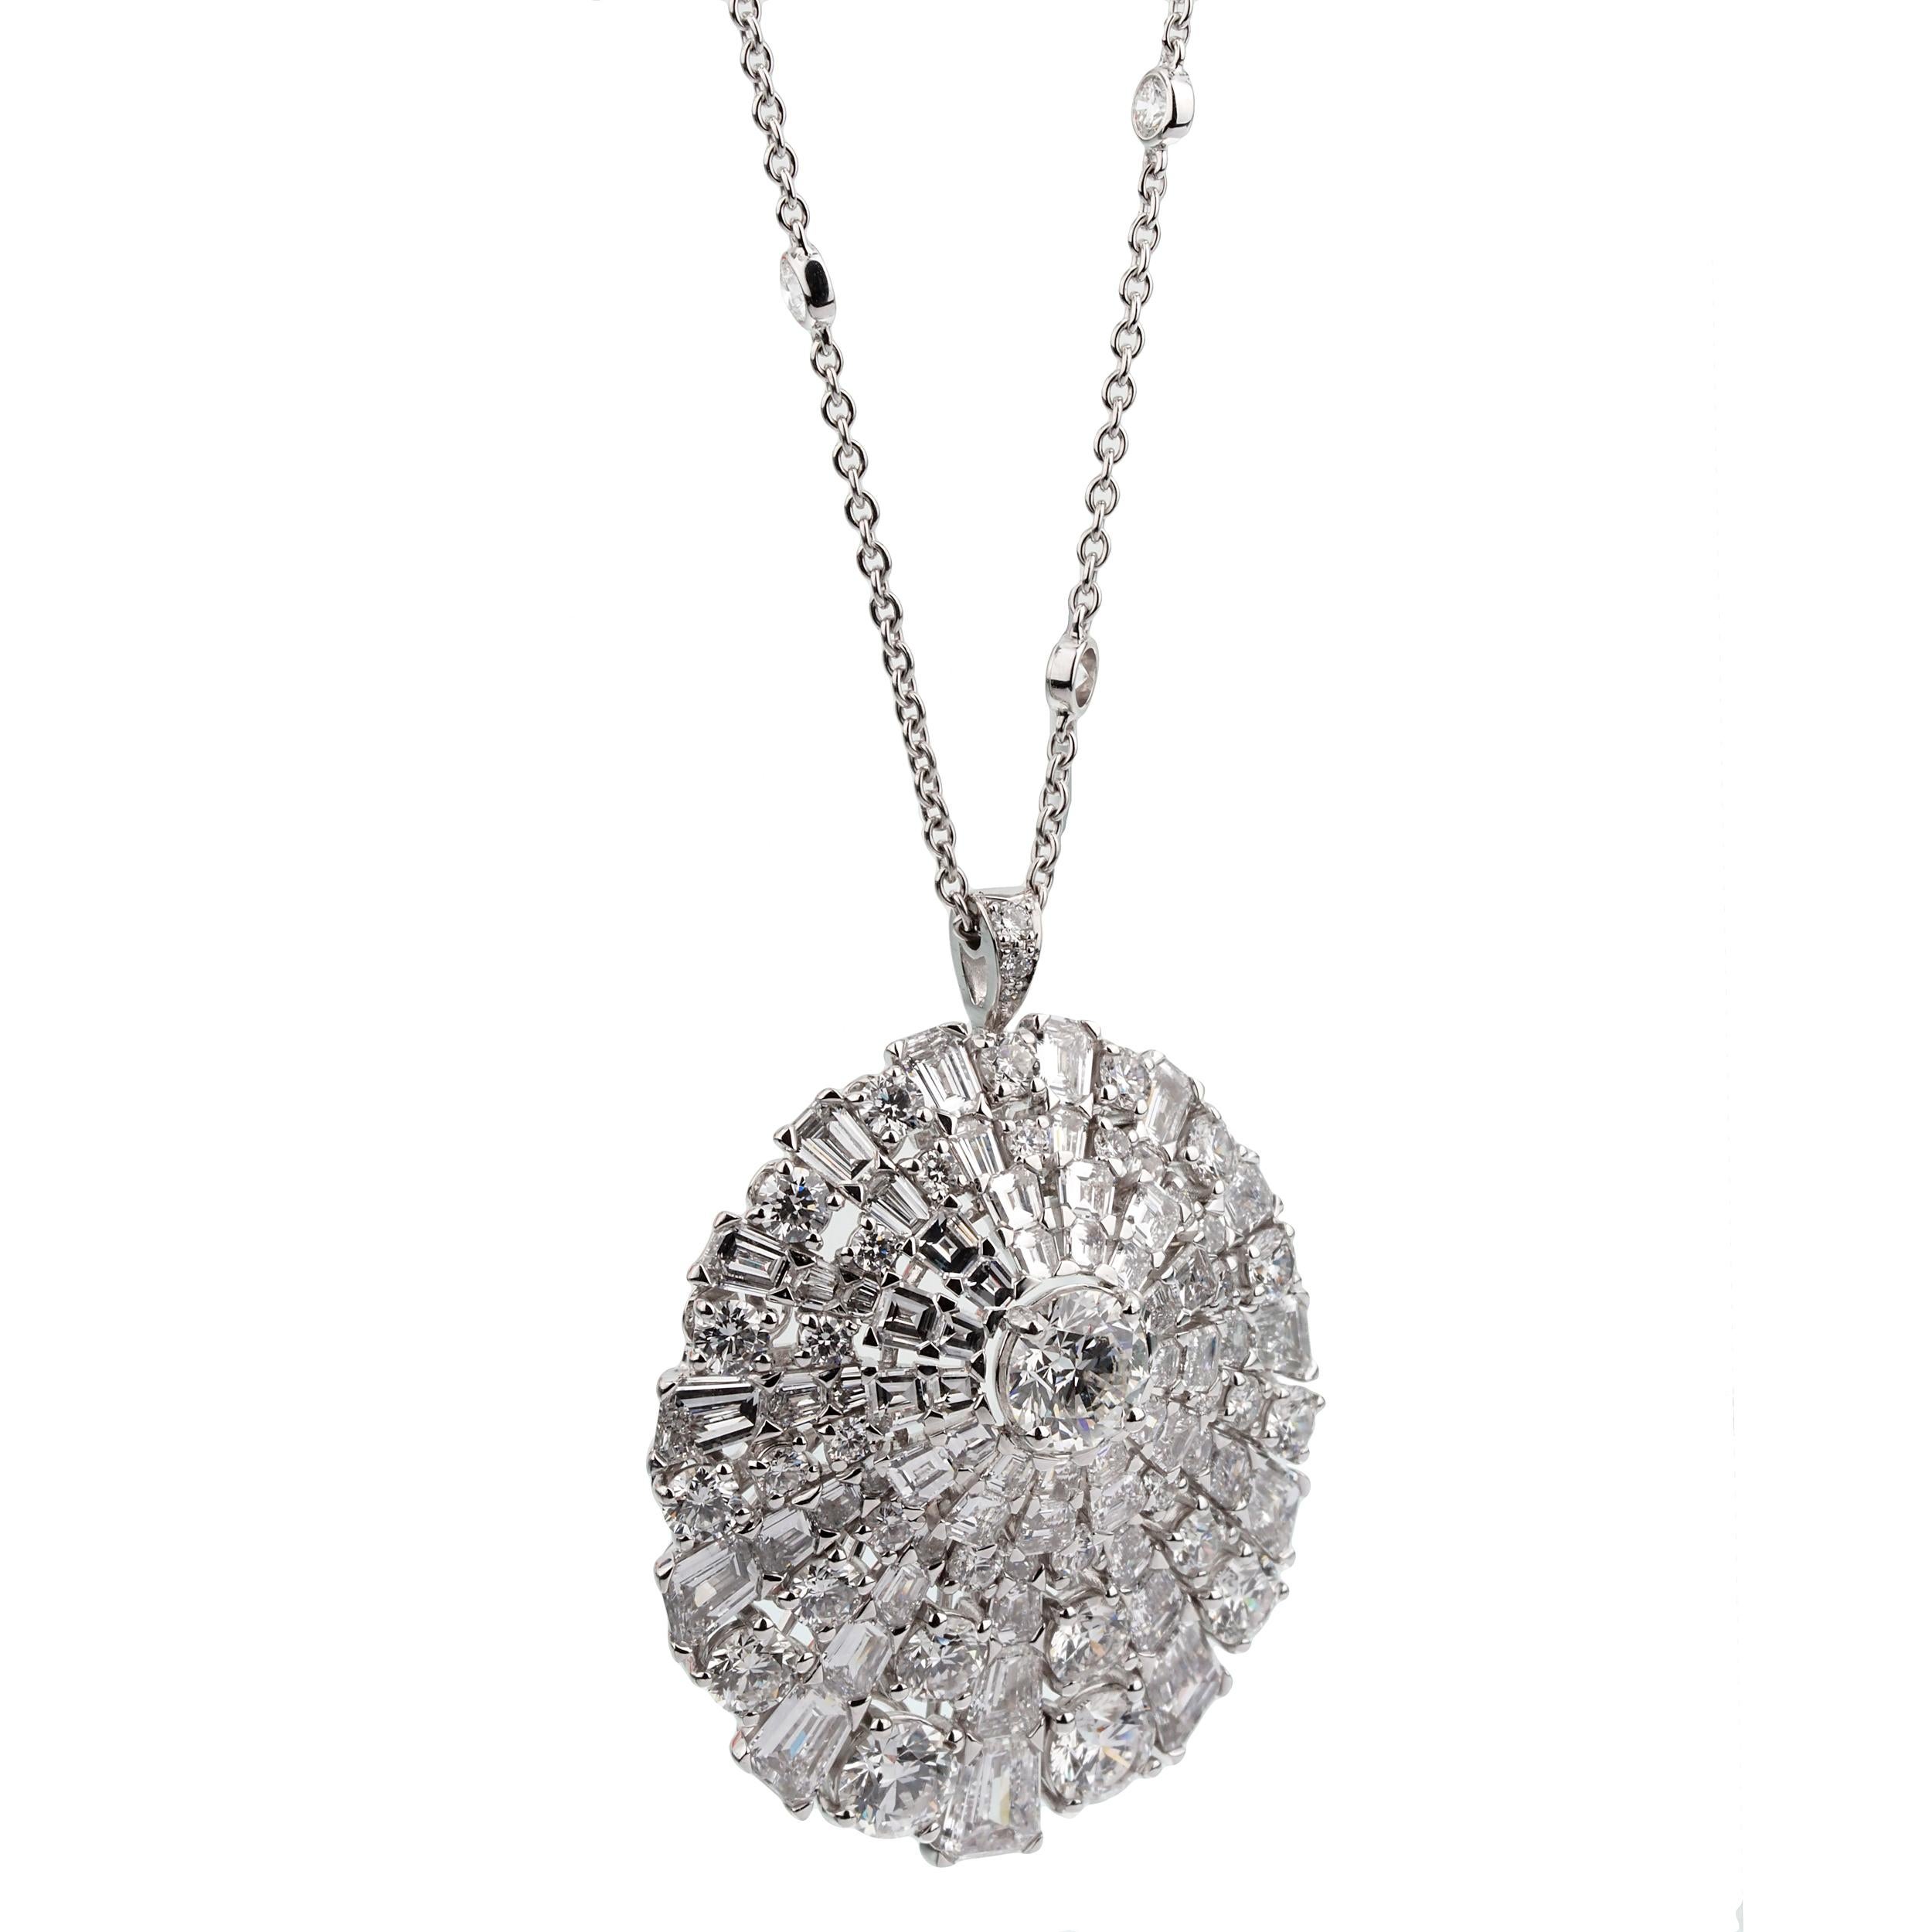 An incredible Graff diamond necklace showcasing round brilliant cut diamonds and baguette diamonds in 18k white gold. The necklace is accompanied by GIA stating that the central round brilliant-cut diamond weighs 1.52 cts G Color, VVS2 Clarity.

The